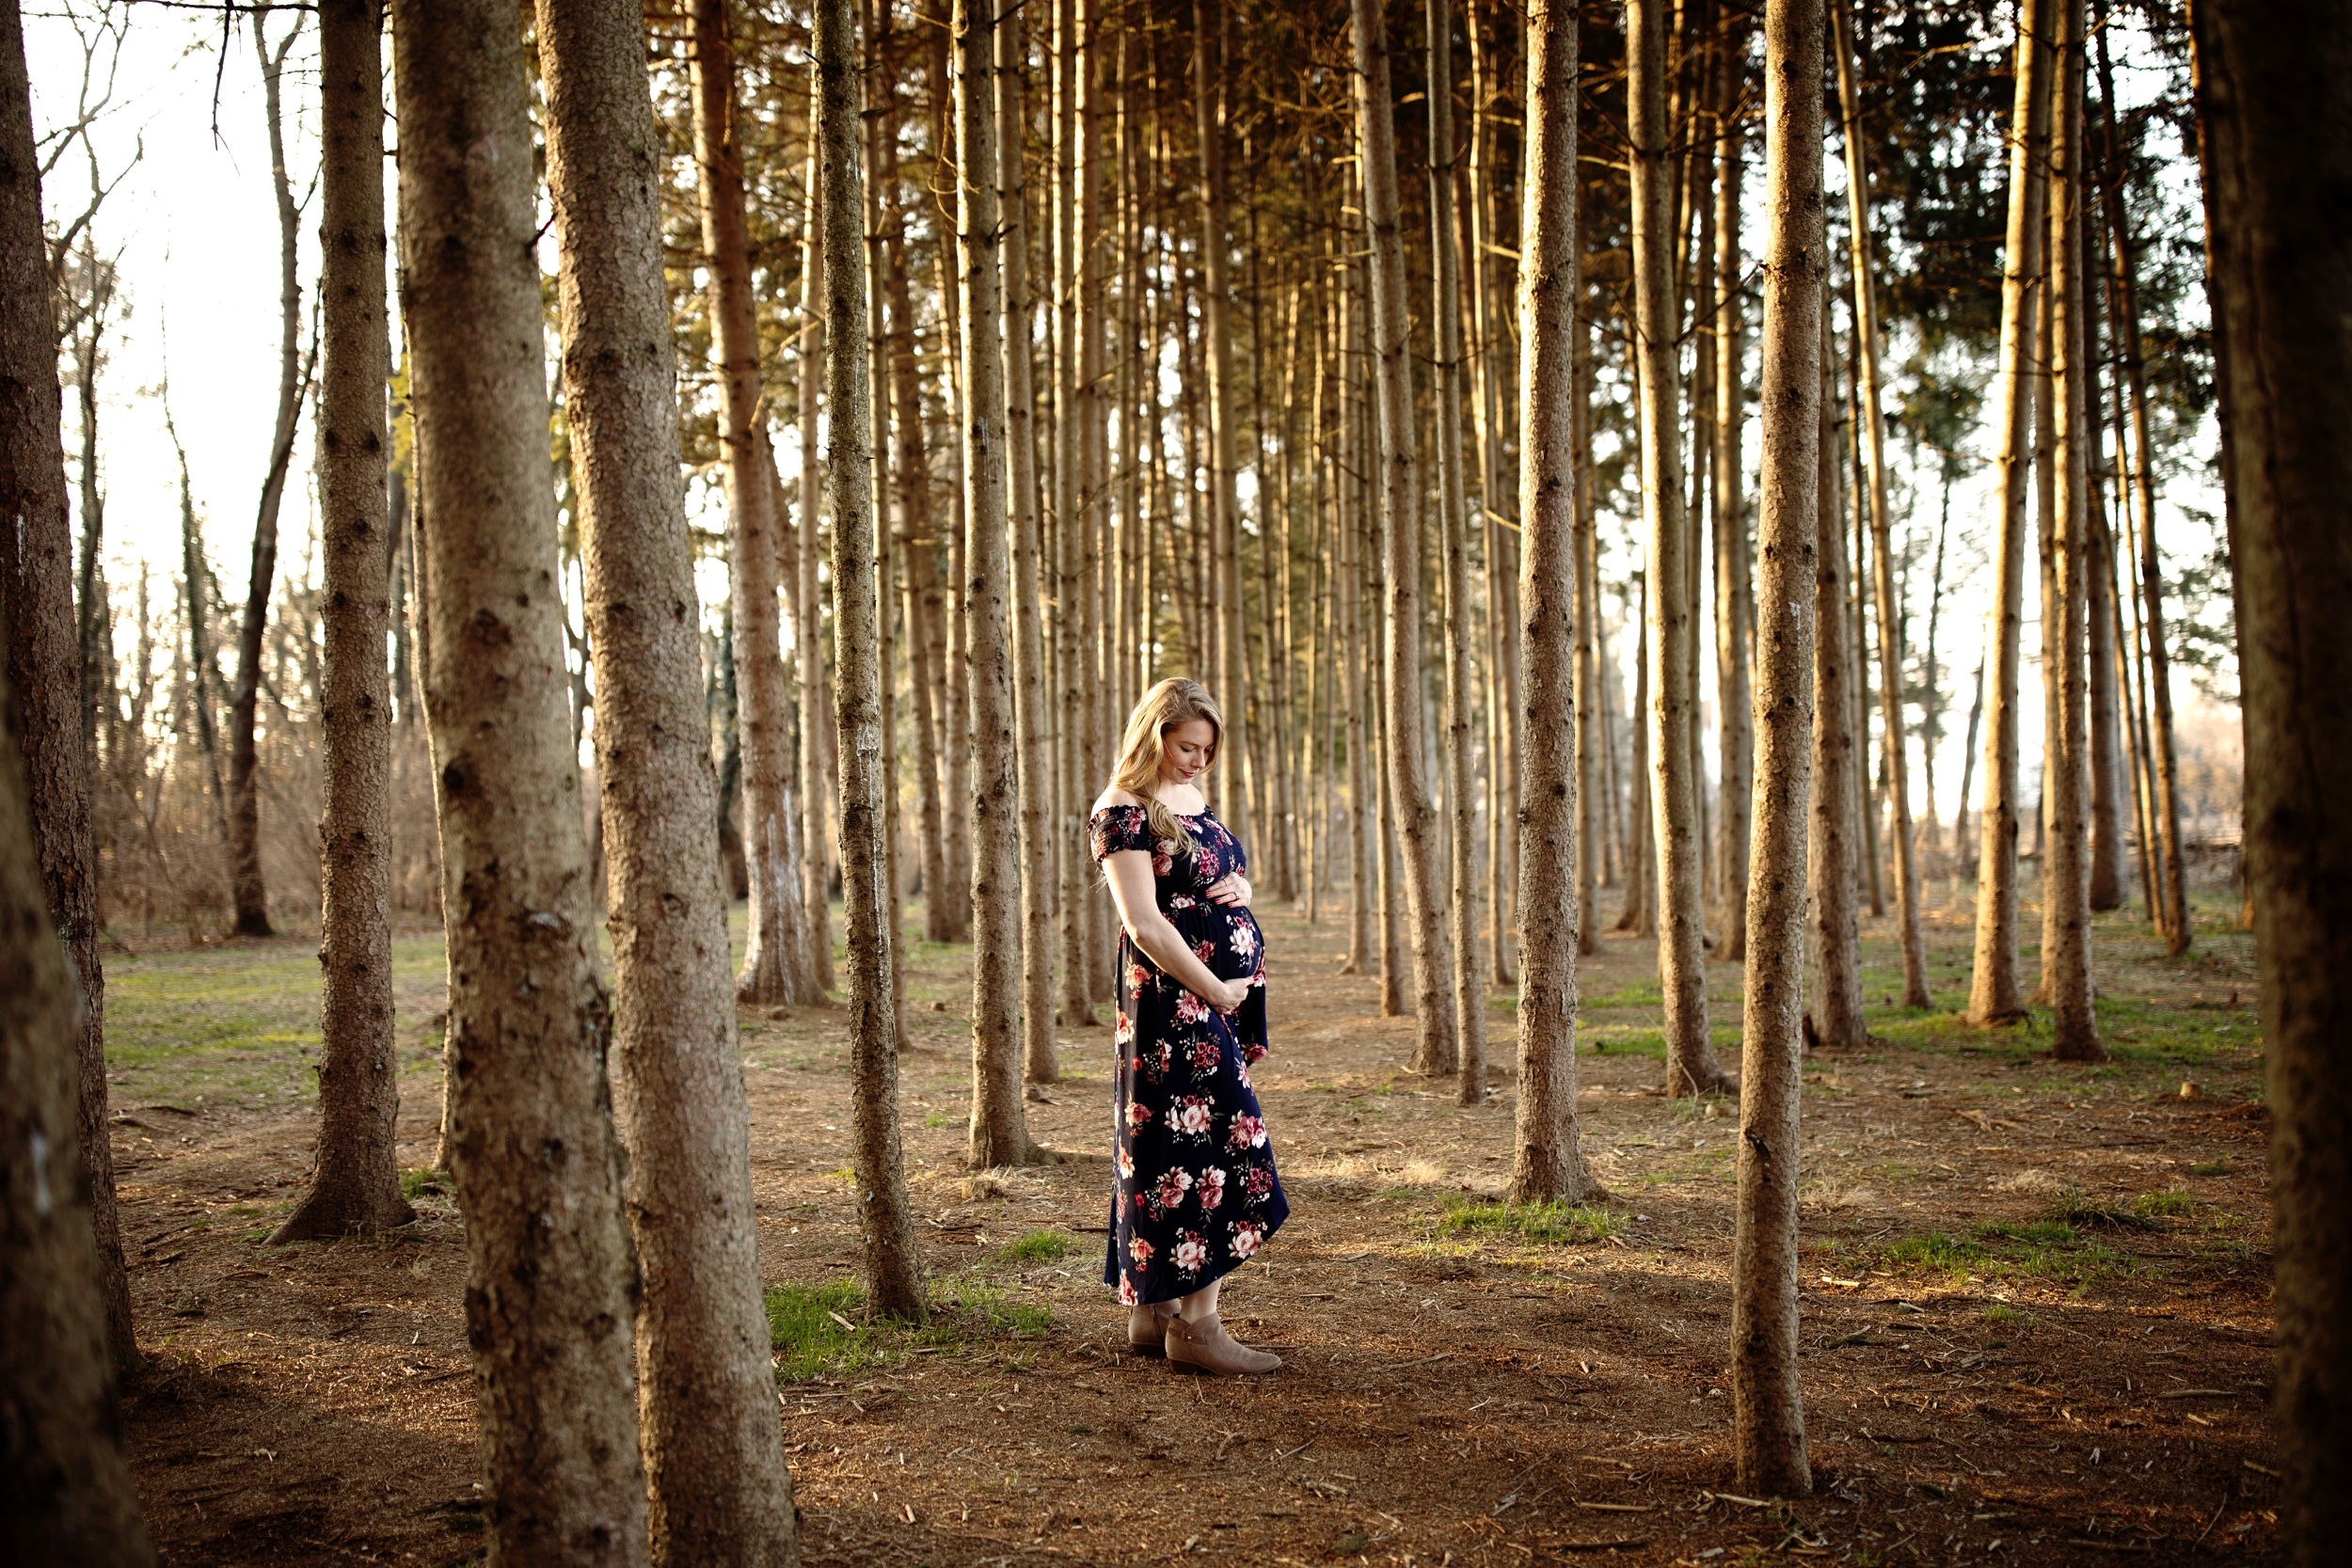 A winter maternity photo session at golden hour in Lancaster PA at Overlook Park. Tall Evergreen trees and warm tones captured by Lancaster Photographer Janae Rose Photography